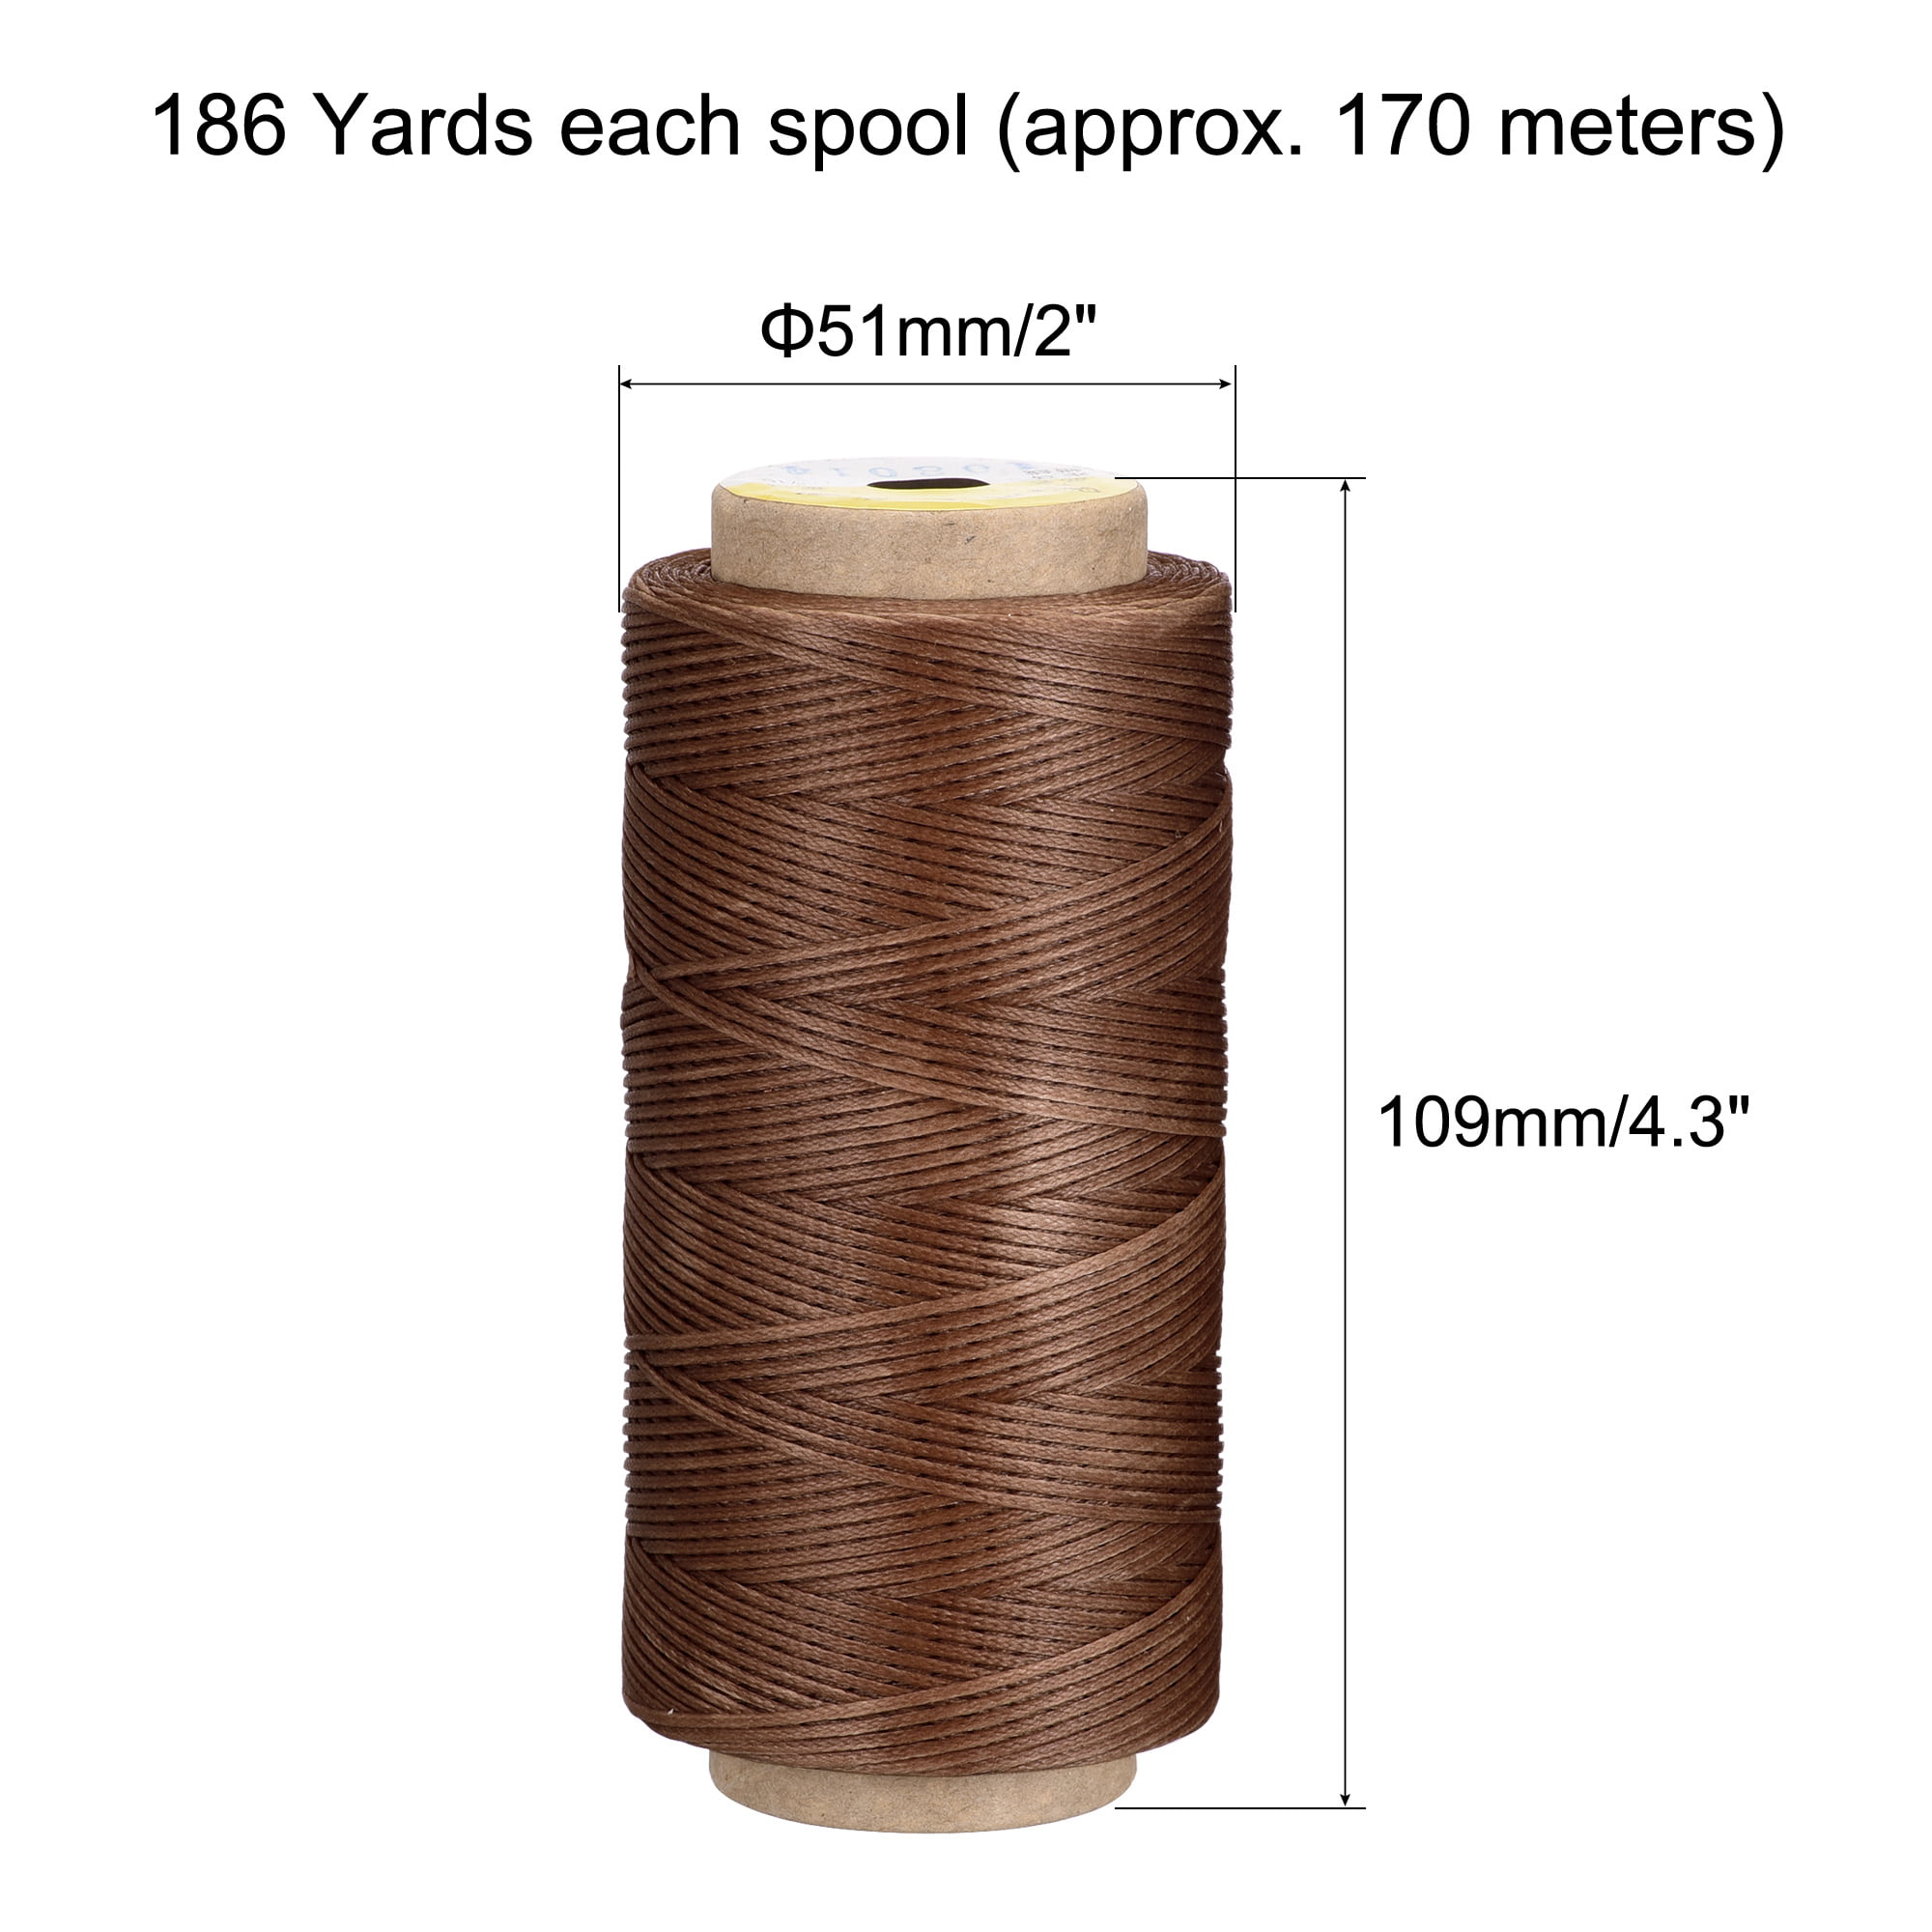 Uxcell 186 Yards 210D/1mm Leather Sewing Thread Polyester Waxed Cord, Pale  Brown 